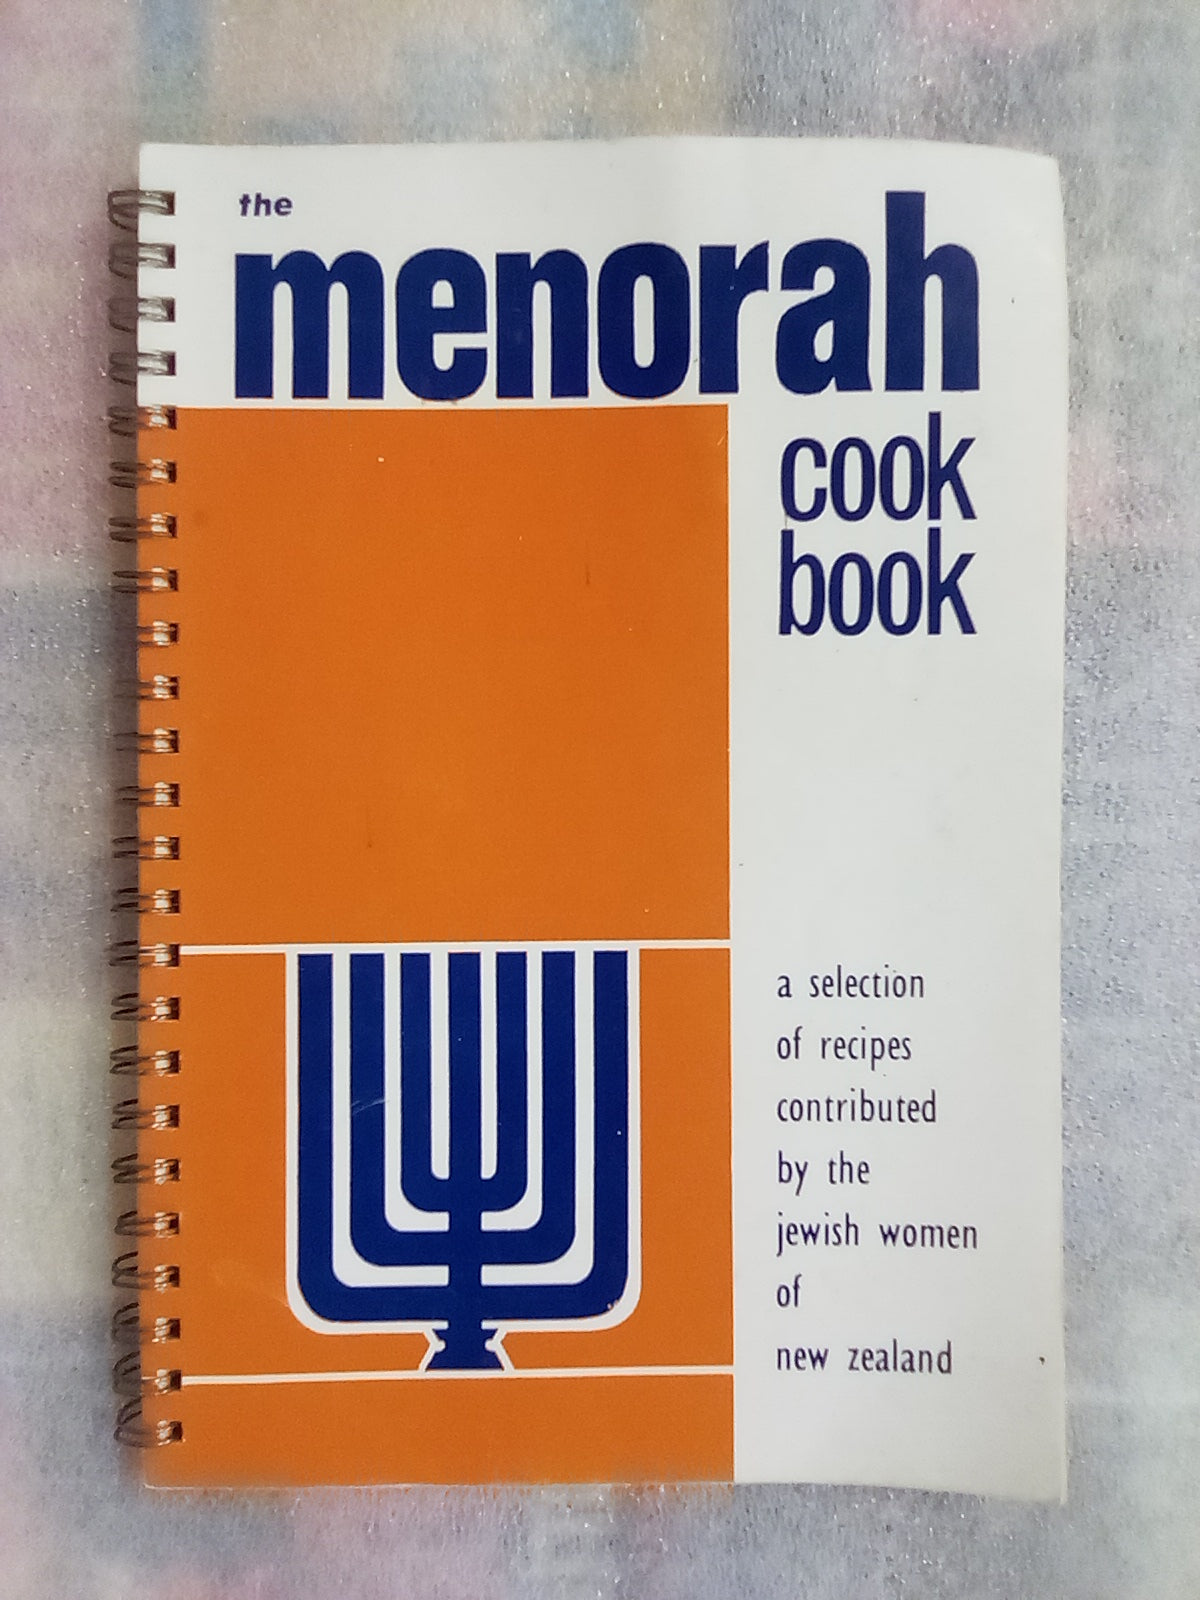 The Menorah Cook Book - Recipes Contributed by the Jewish Women of NZ